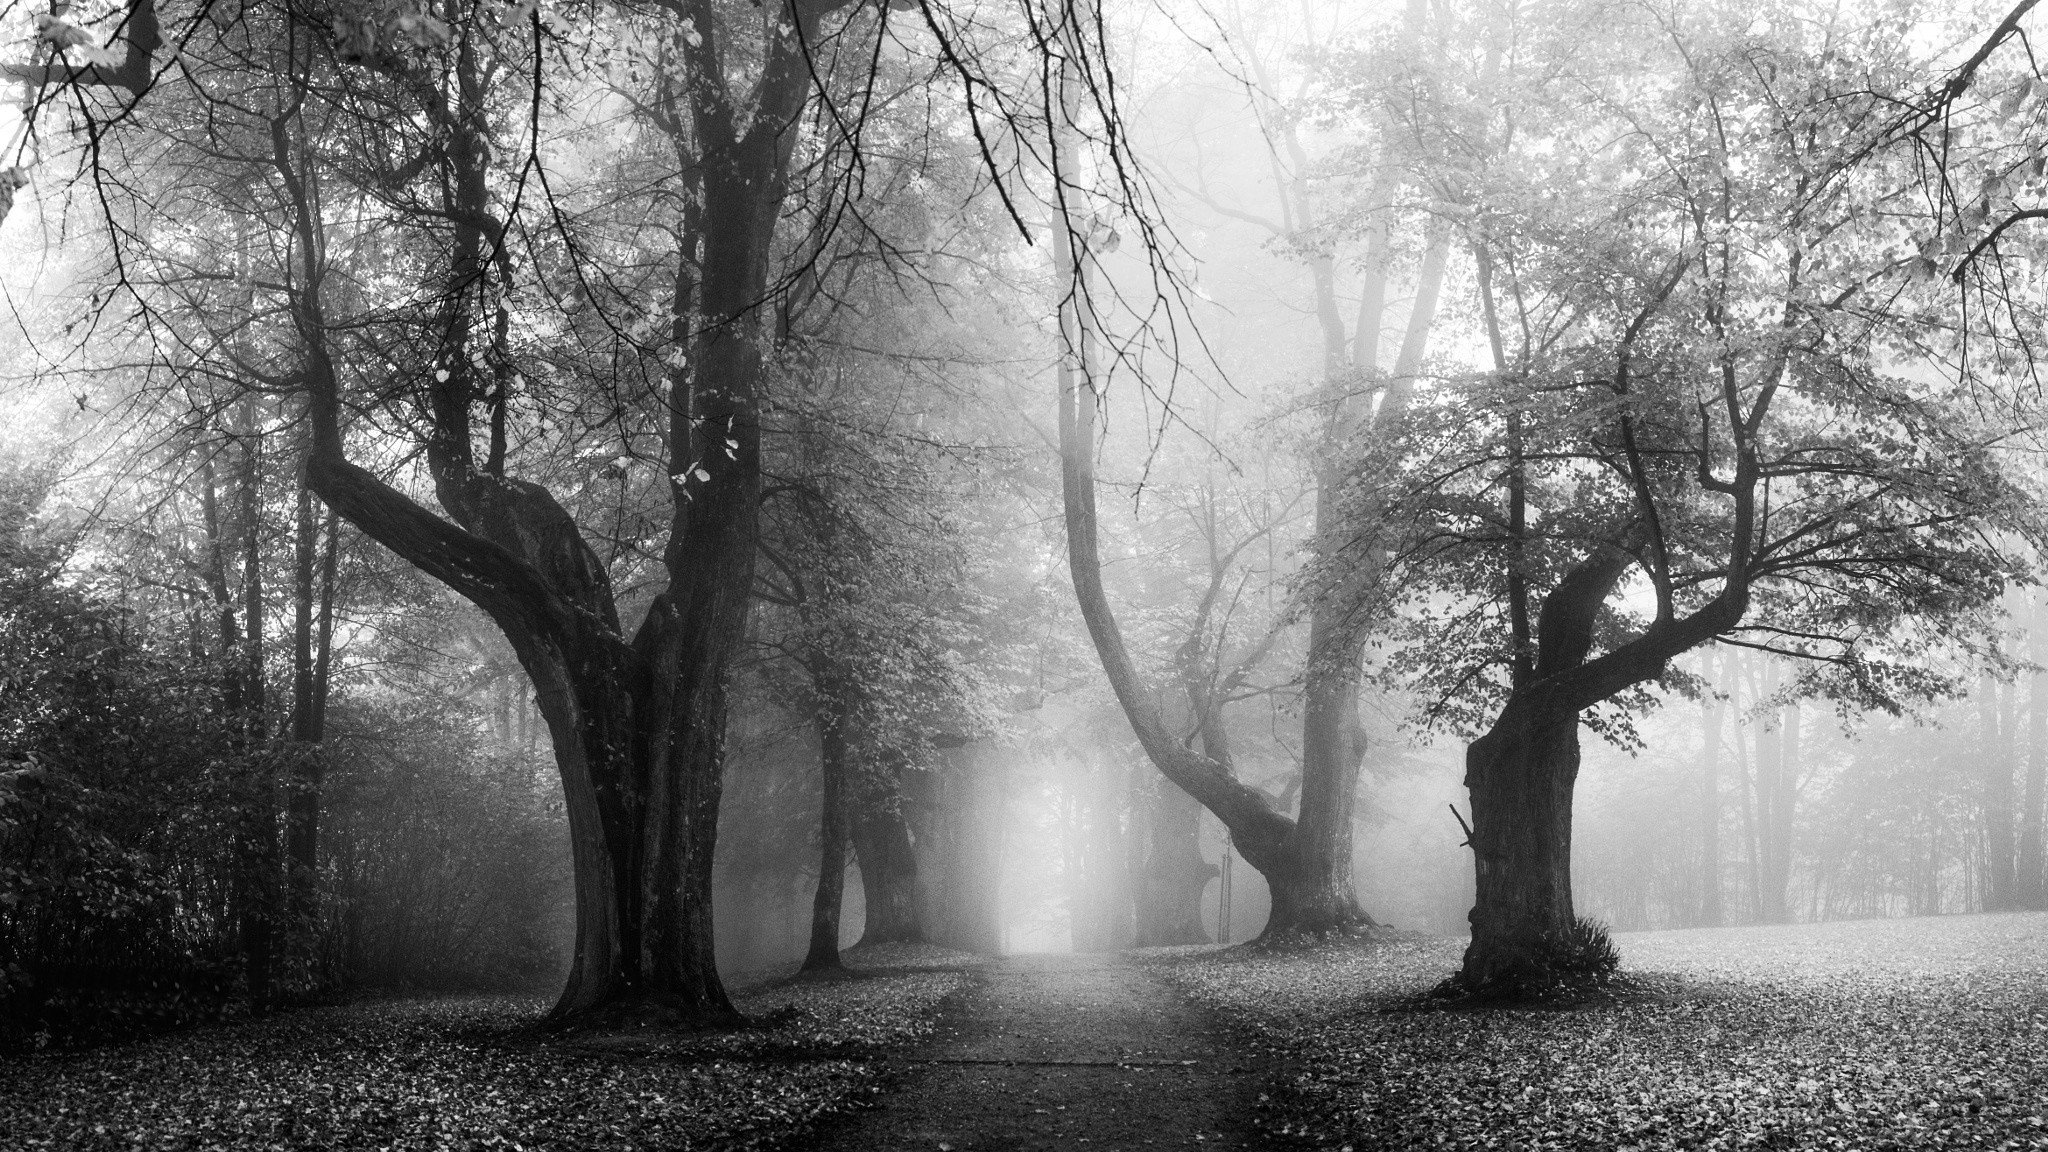 General 2048x1152 nature morning mist fall leaves old trees path dirt road monochrome Germany